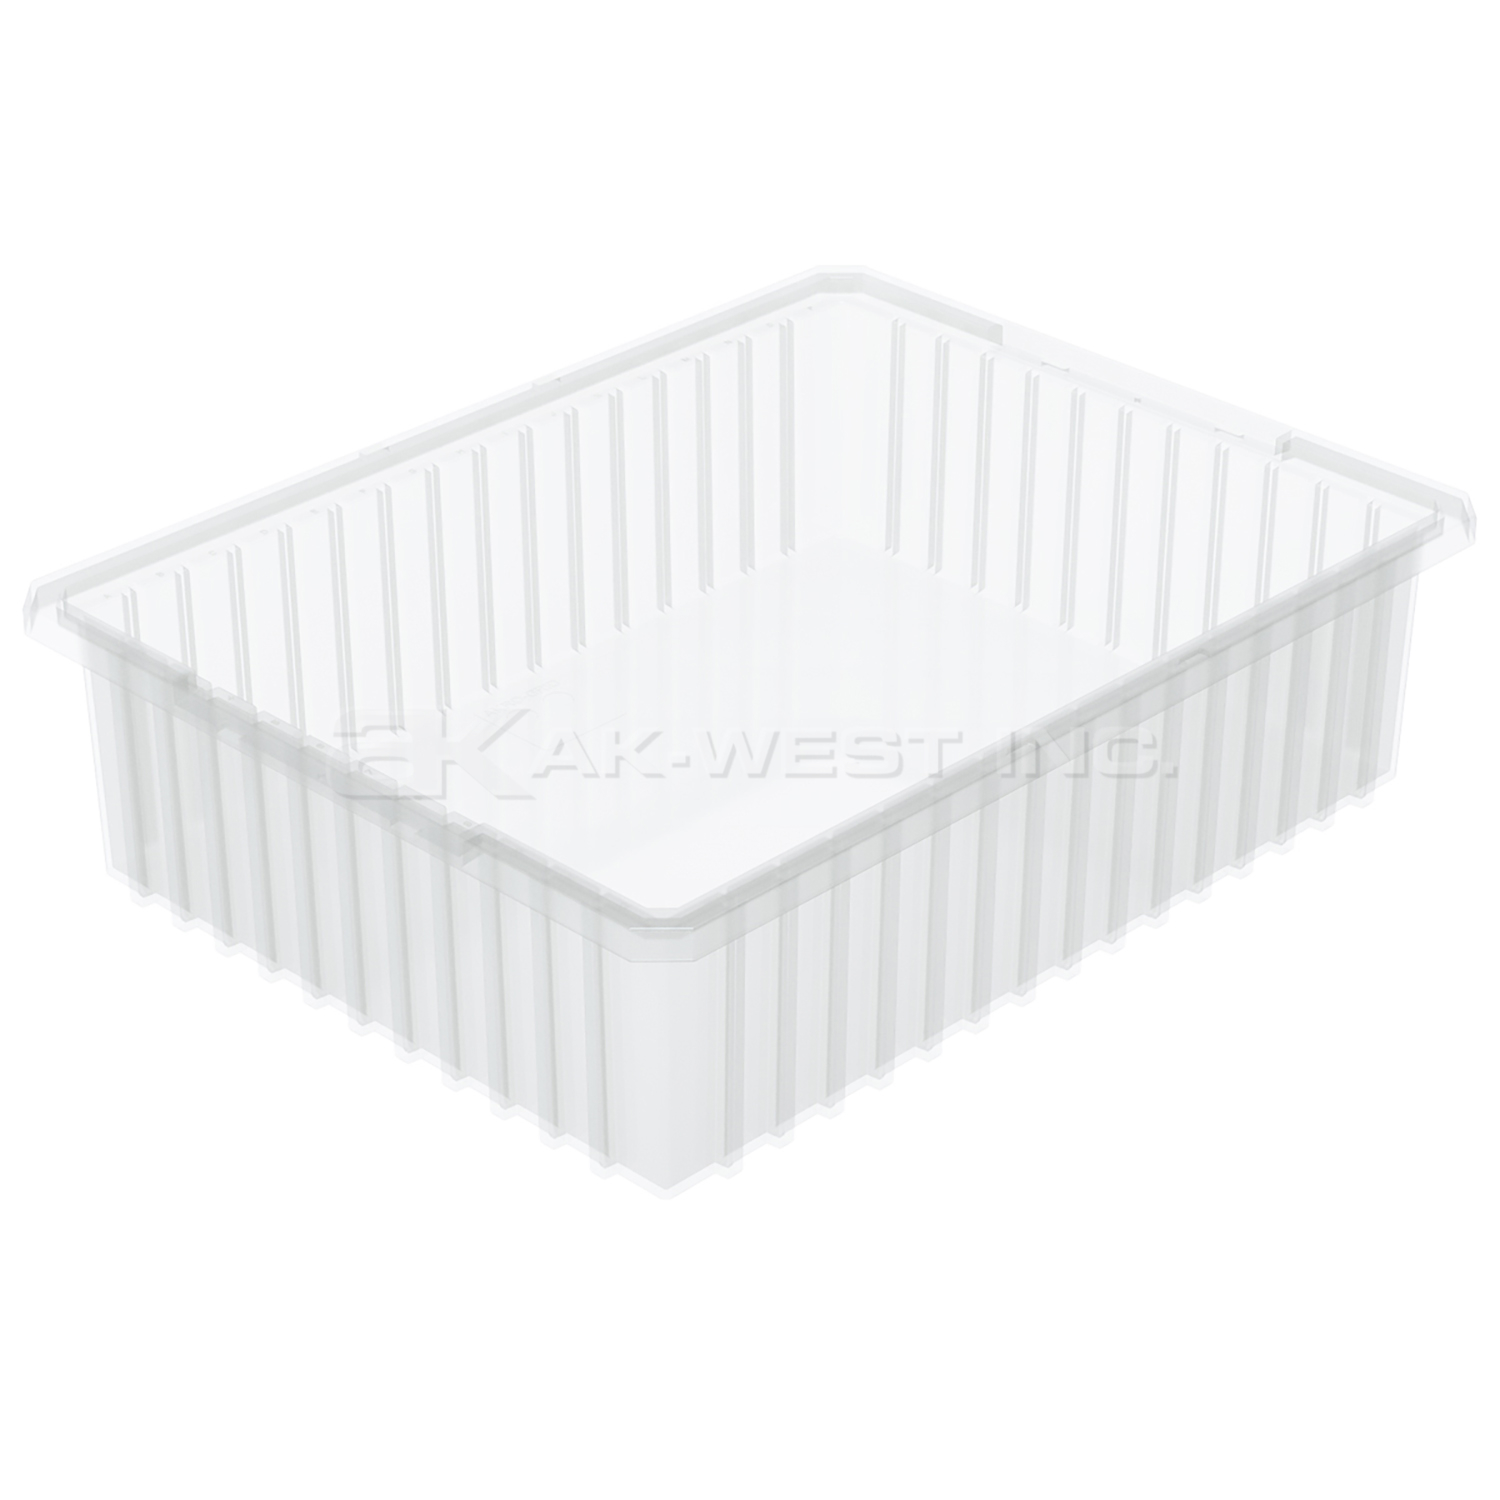 Clear, 22-3/8" x 17-3/8" x 6" Dividable Grid Container (4 Per Carton)